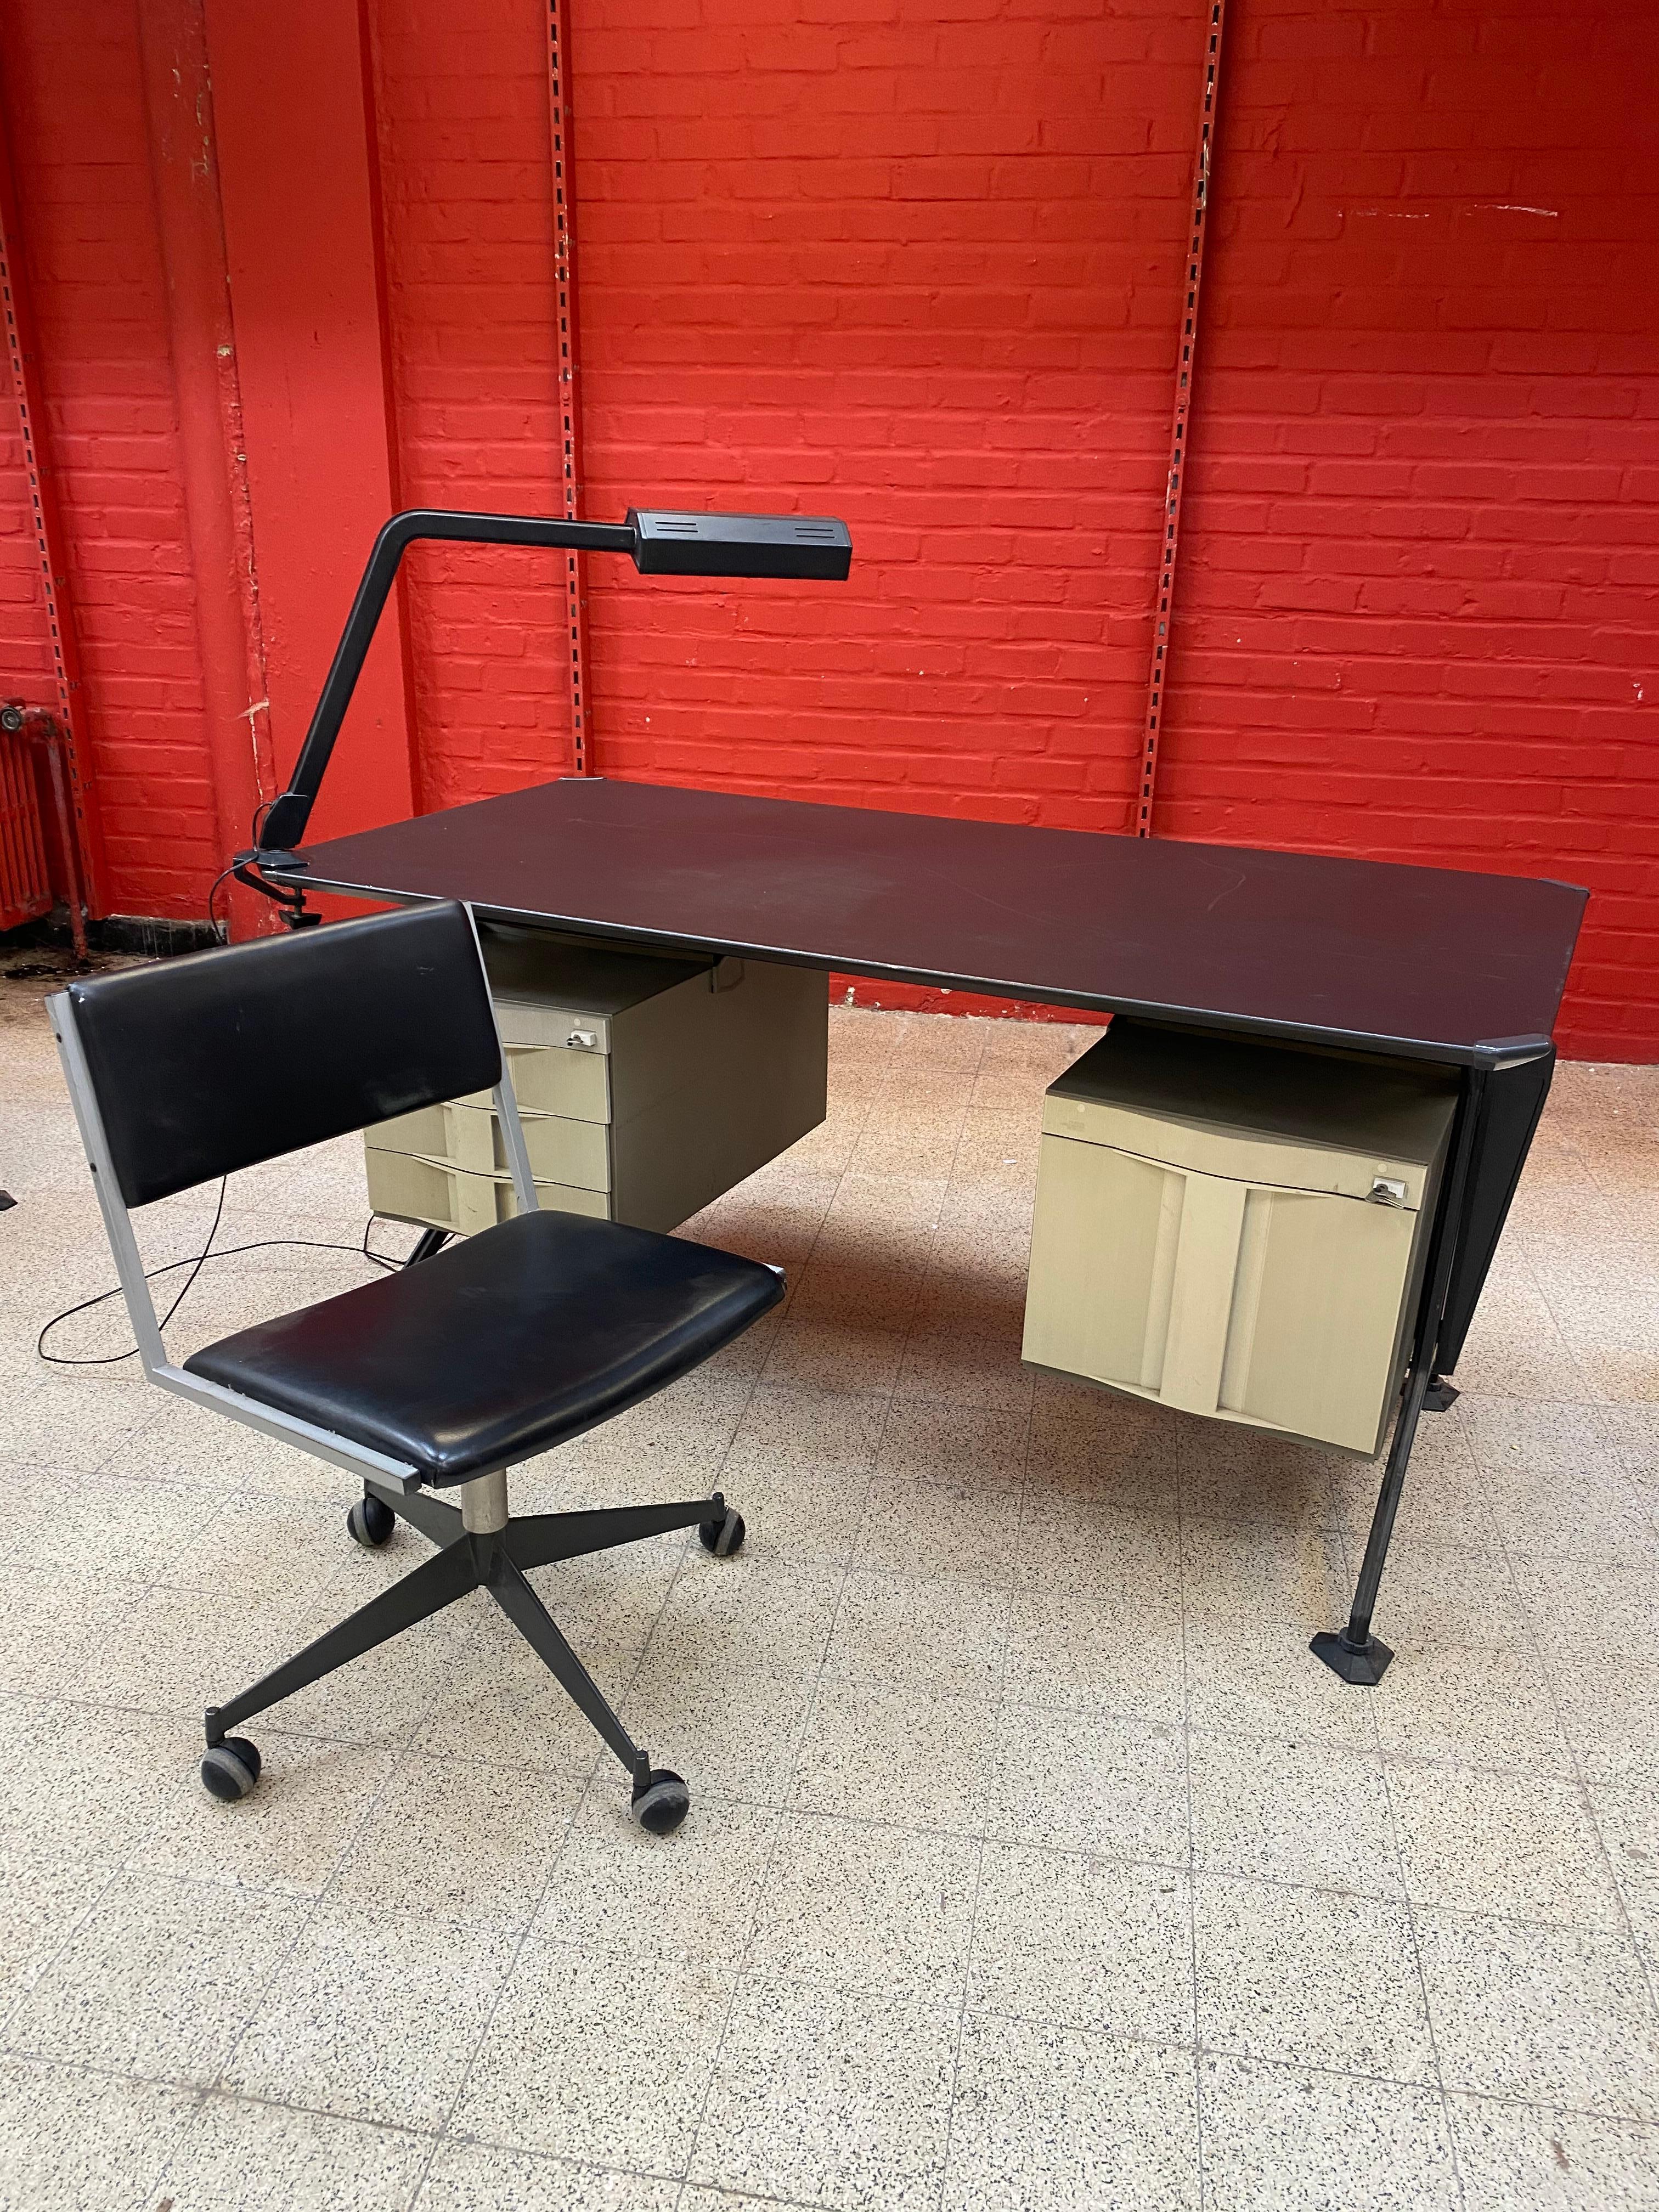 Rare Desk Set by BBPR for Olivetti Synthesis, circa 1960 For Sale 6